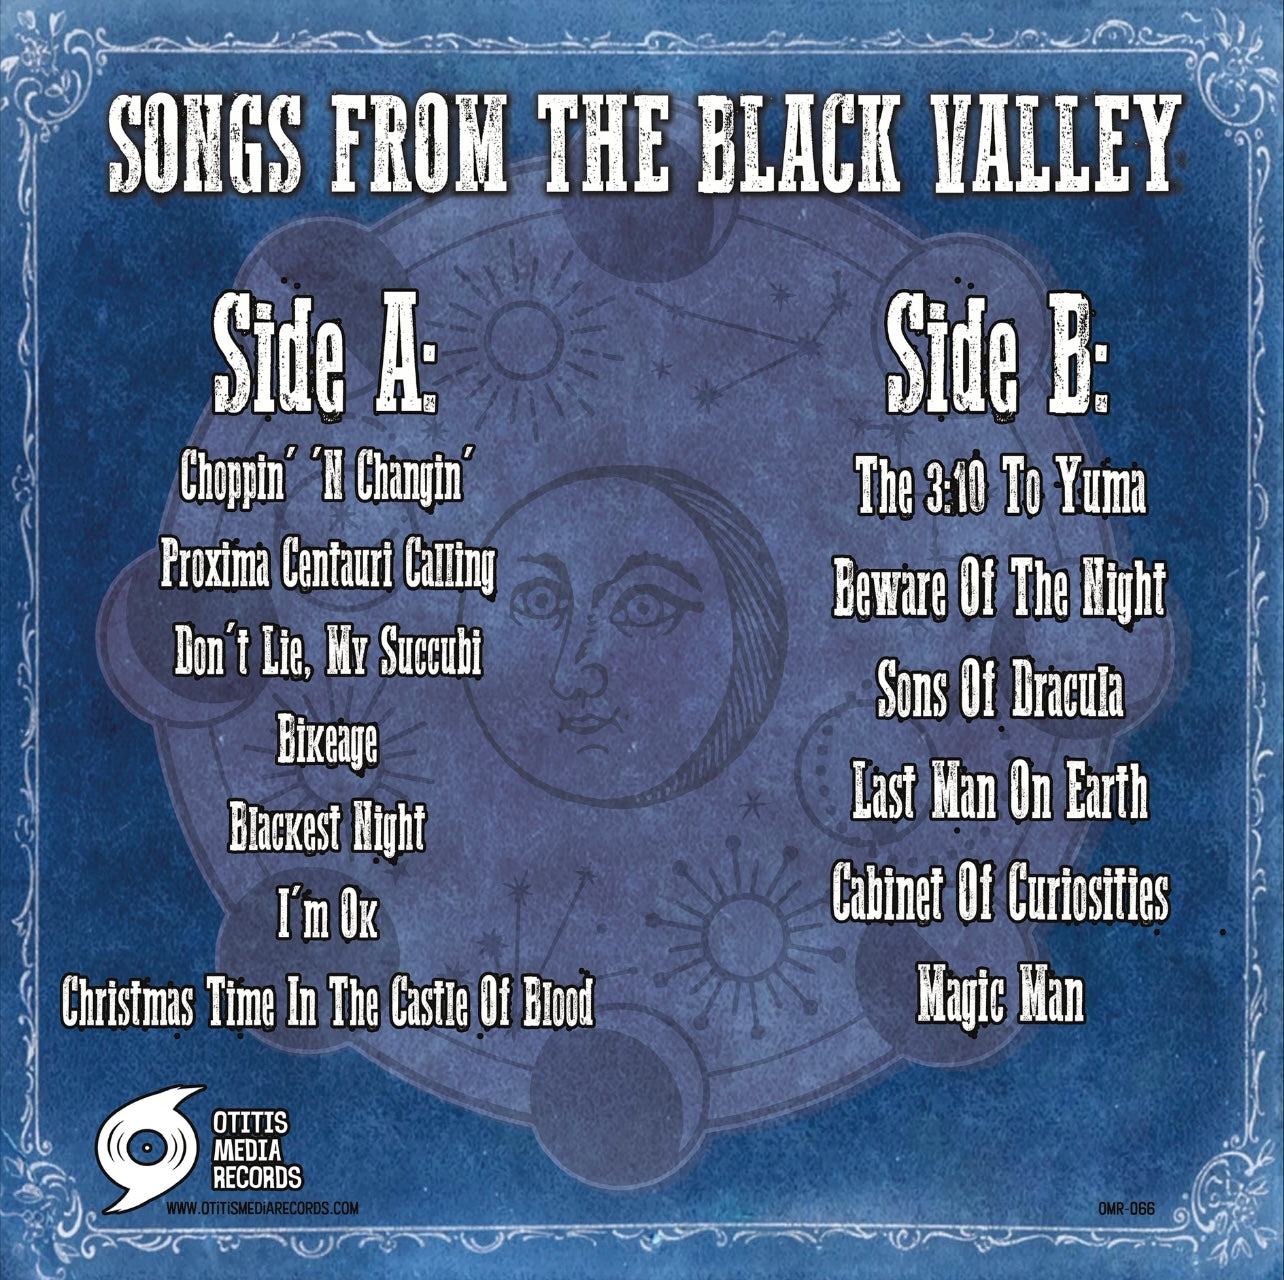 OMR-066 Black Valley Moon “Songs From The Black Valley” LP (Colored Vinyl)